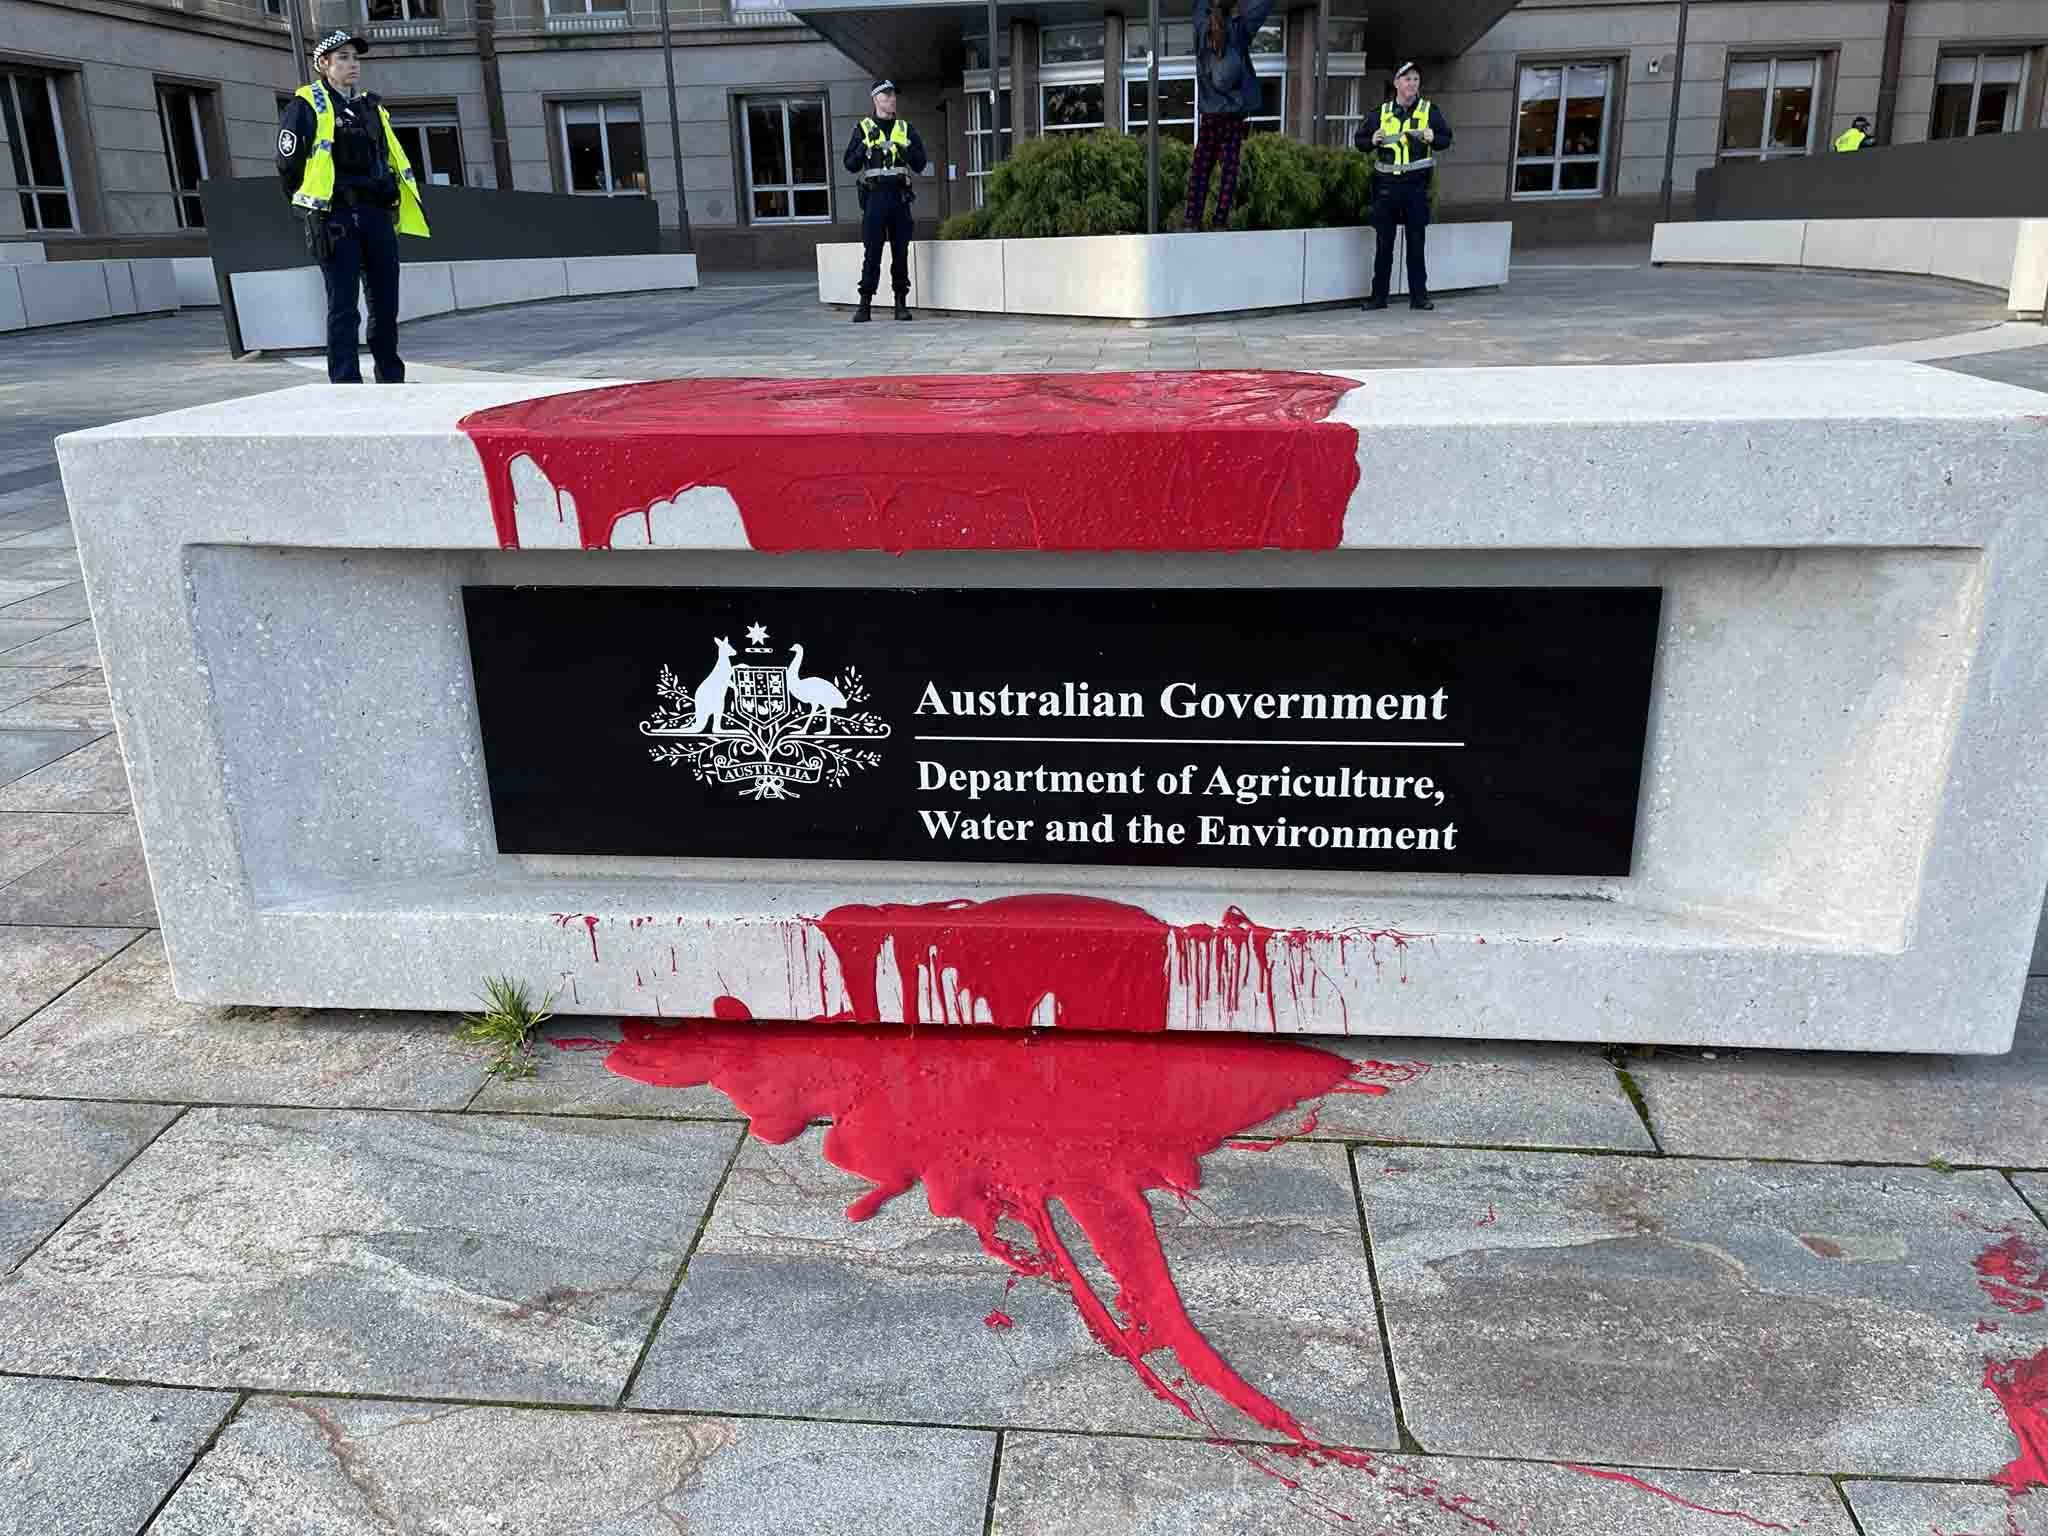 Government department plinth covered in fake blood